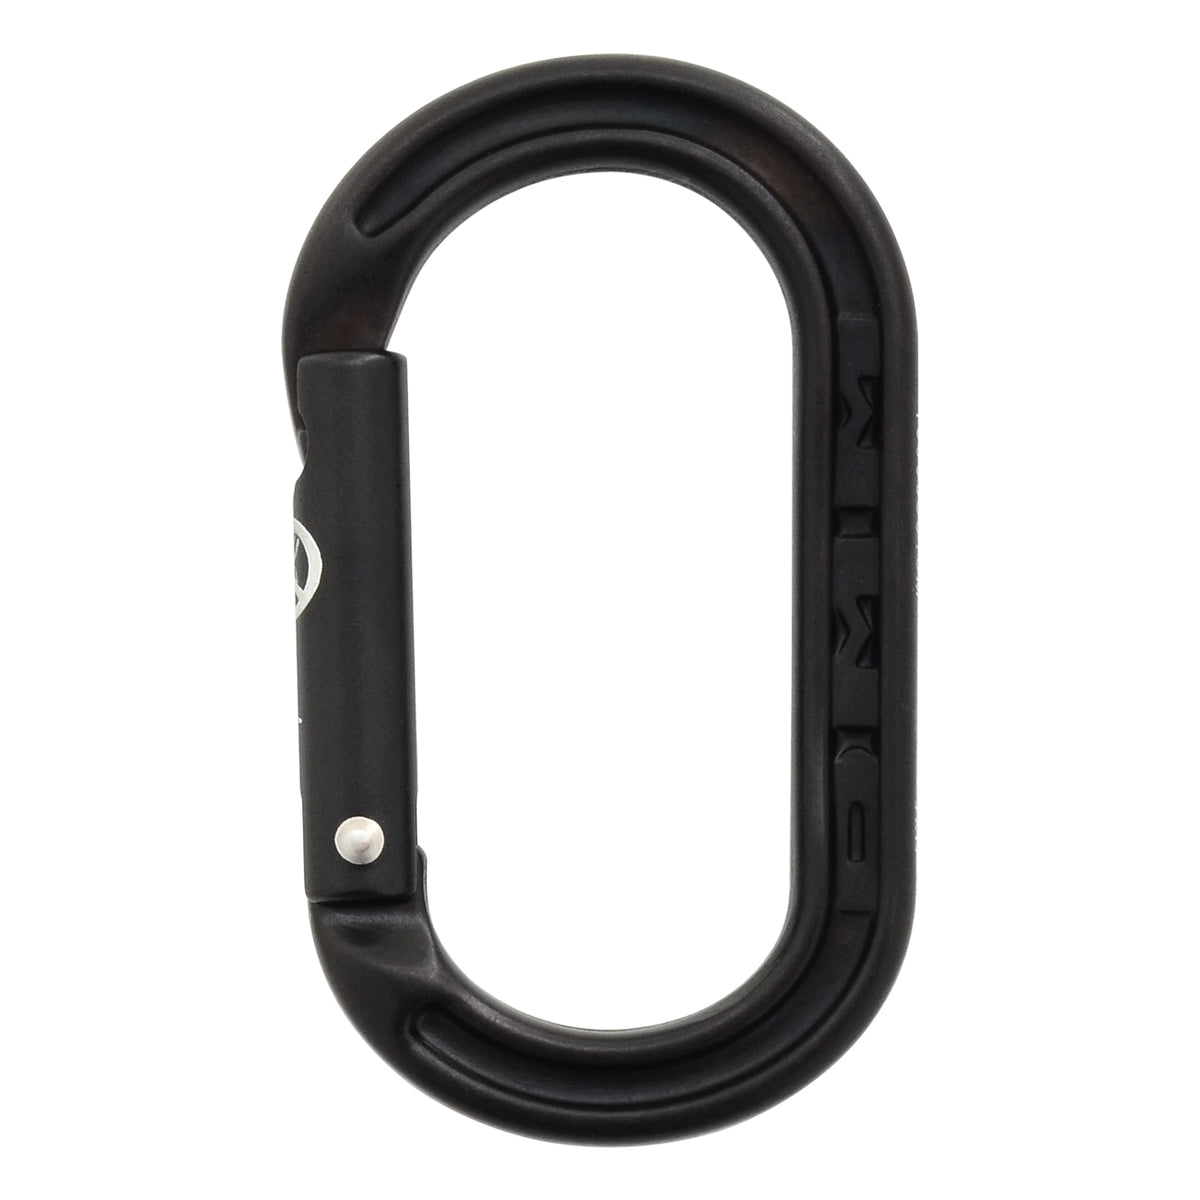 DMM XSRE (accessory) carabiner in Black colour